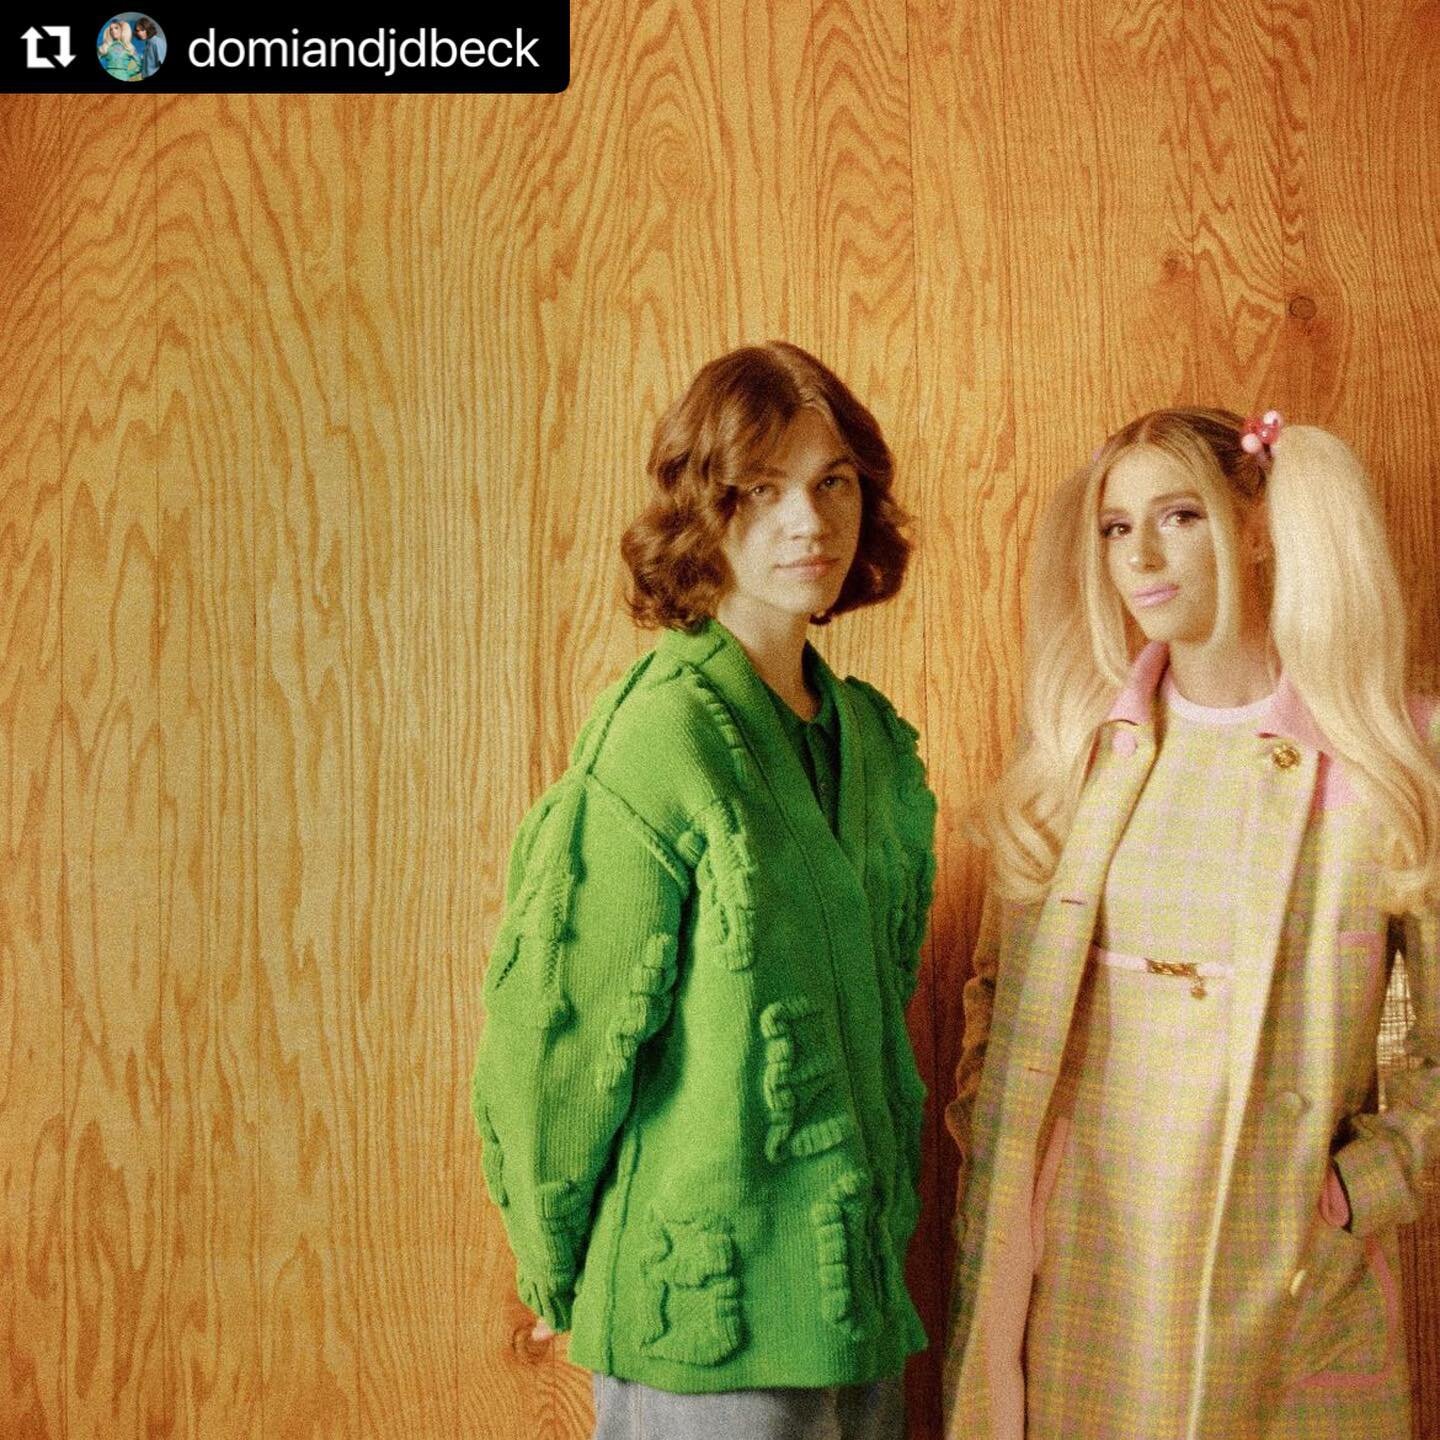 #Repost @domiandjdbeck with @voelkerstudio 
・・・
TRACK 5. NOT TiGHT
The very first song we&rsquo;ve ever written, back in March 2018!! Then we played it for @thundercatmusic &amp; he recorded bass and his solo in March 2019. 
#NOTTiGHT
📸 @tehillahdec